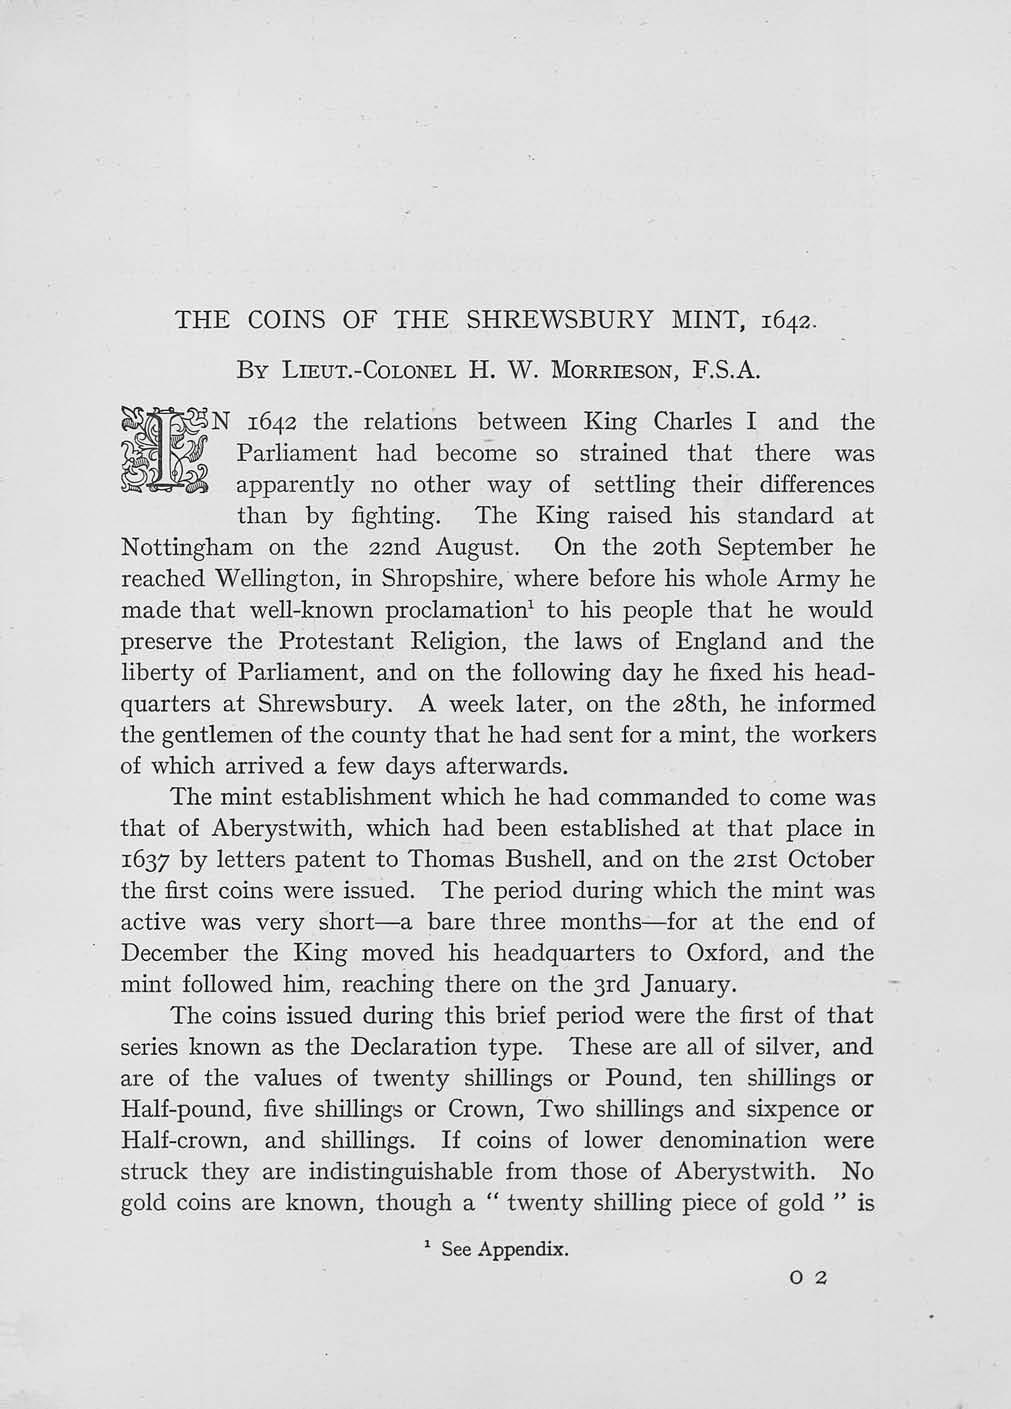 THE COINS OF THE SHREWSBURY MINT, 1642. BY LIEUT.-COLONEL H. W. MORRIESON, F.S.A.